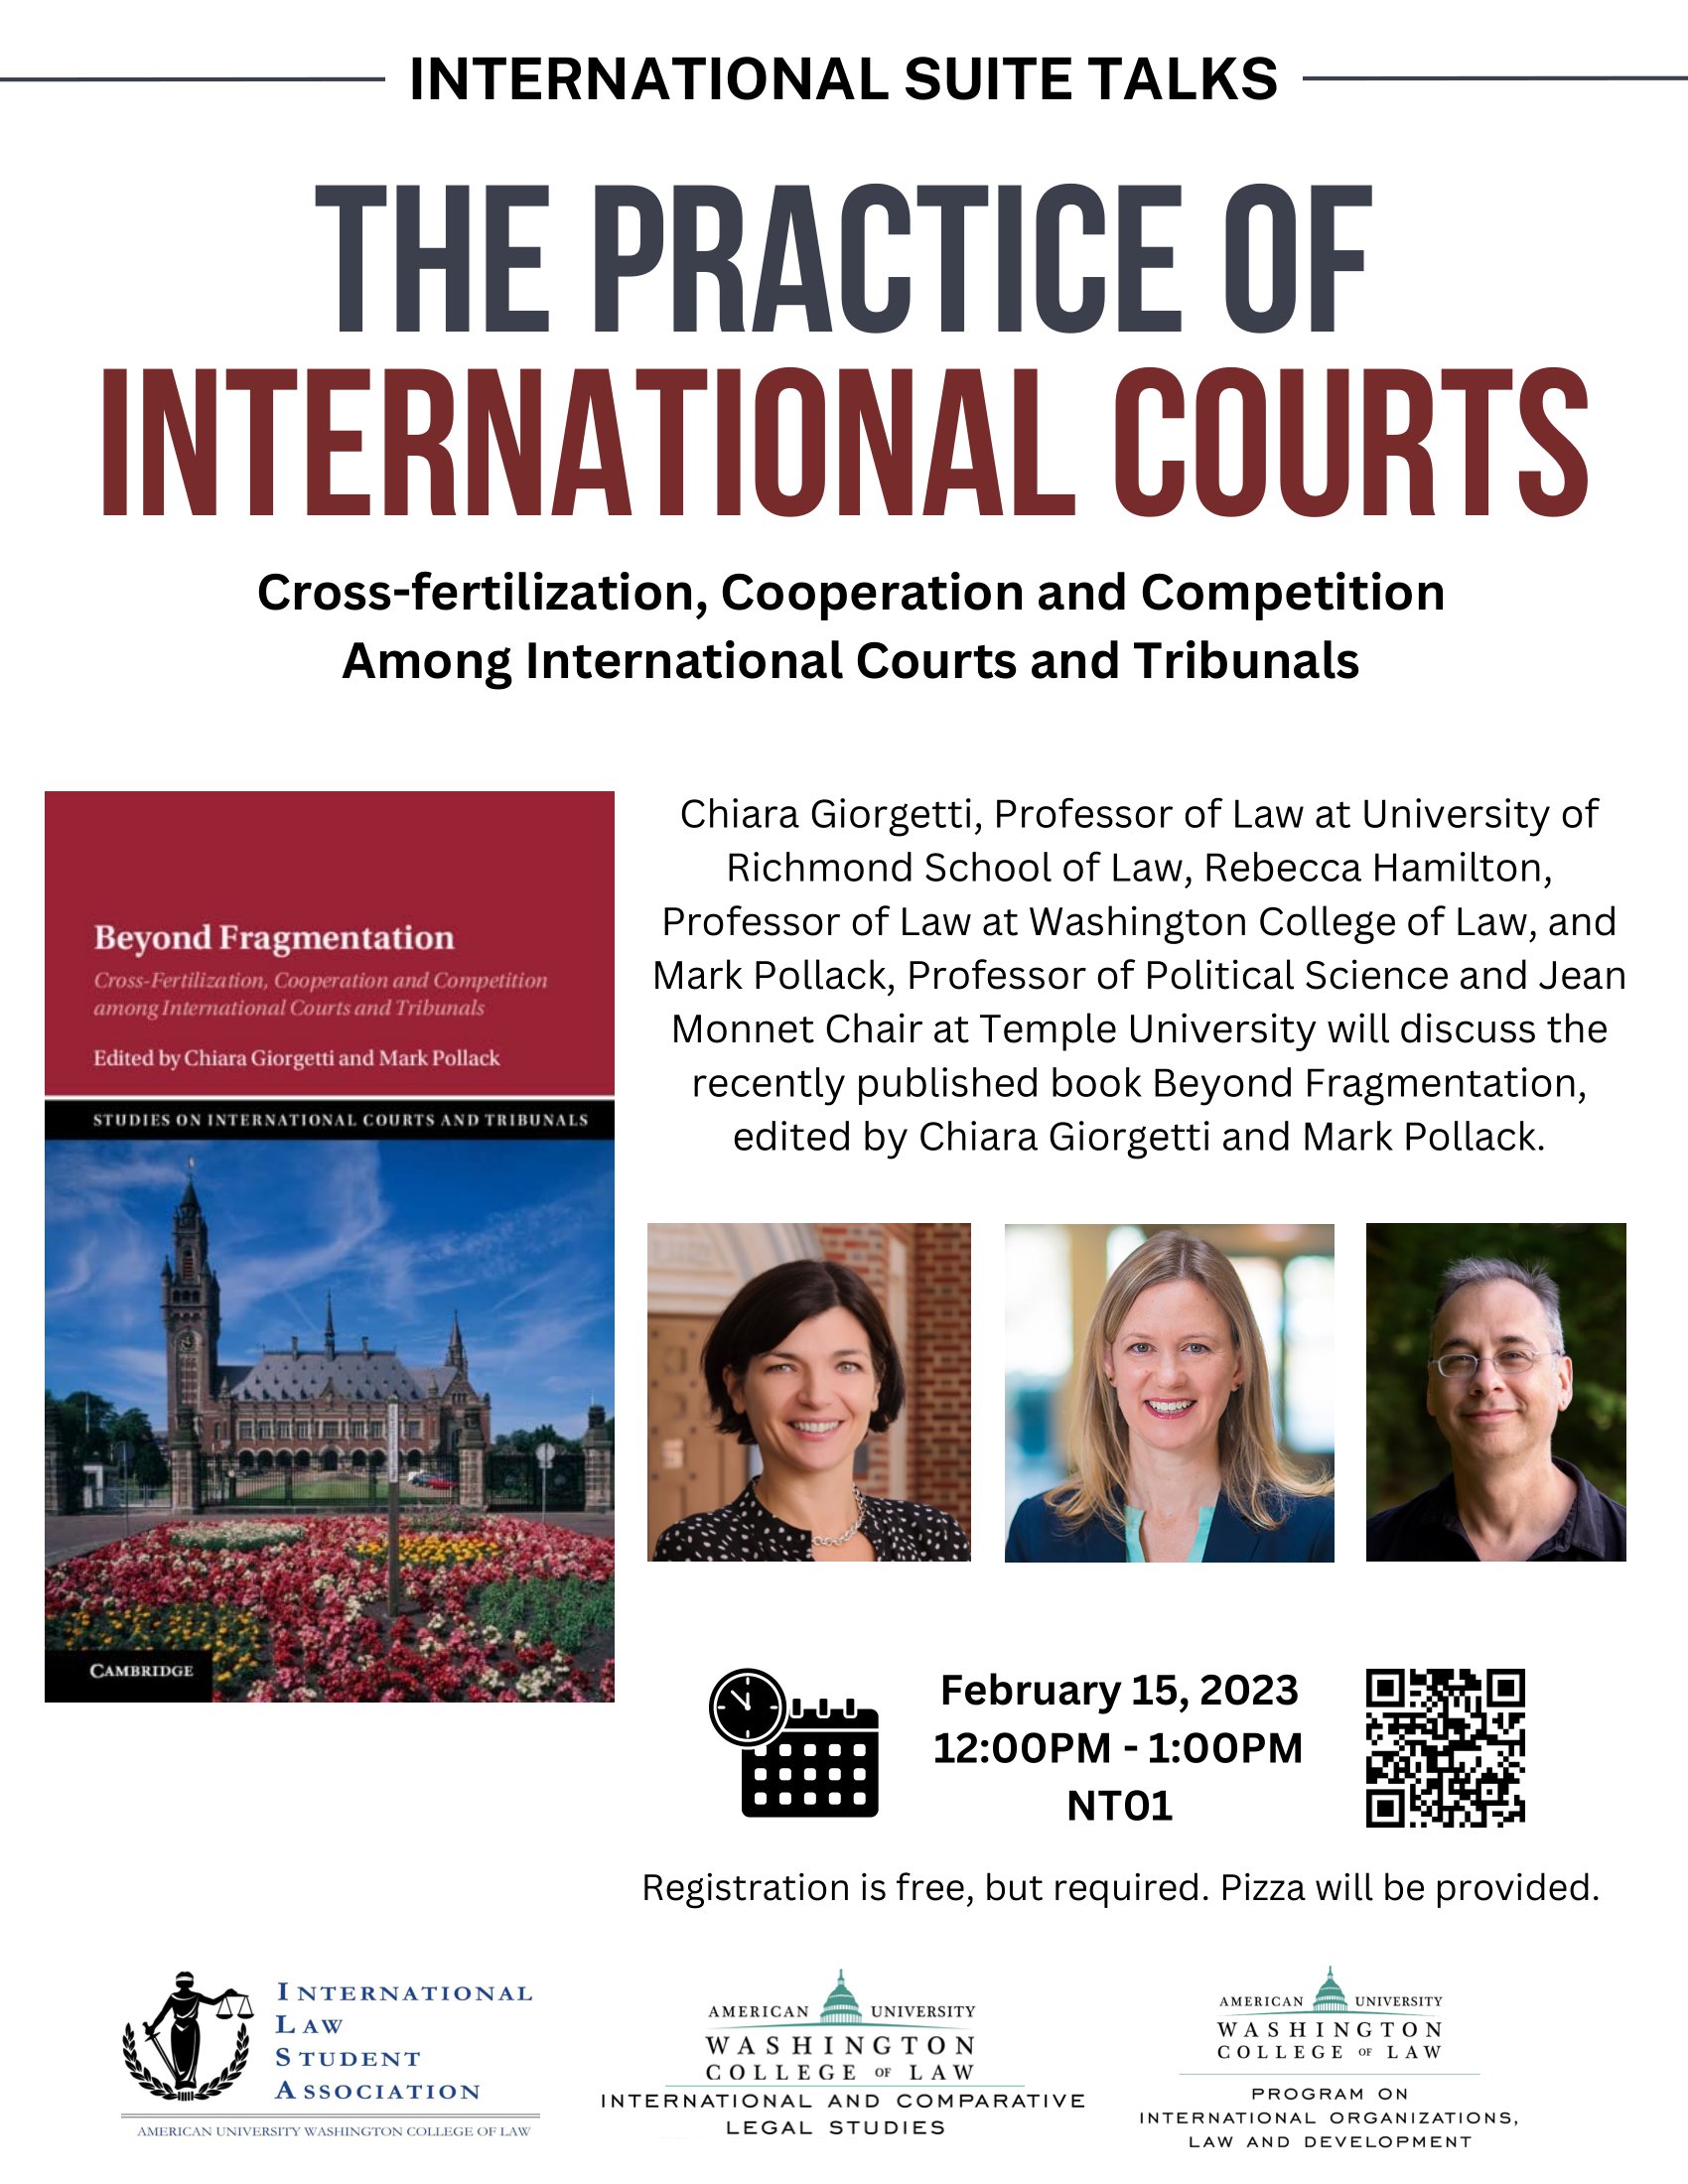 WCRO Director Susana SáCouto Moderates International Suite Talk: The Practice of International Courts